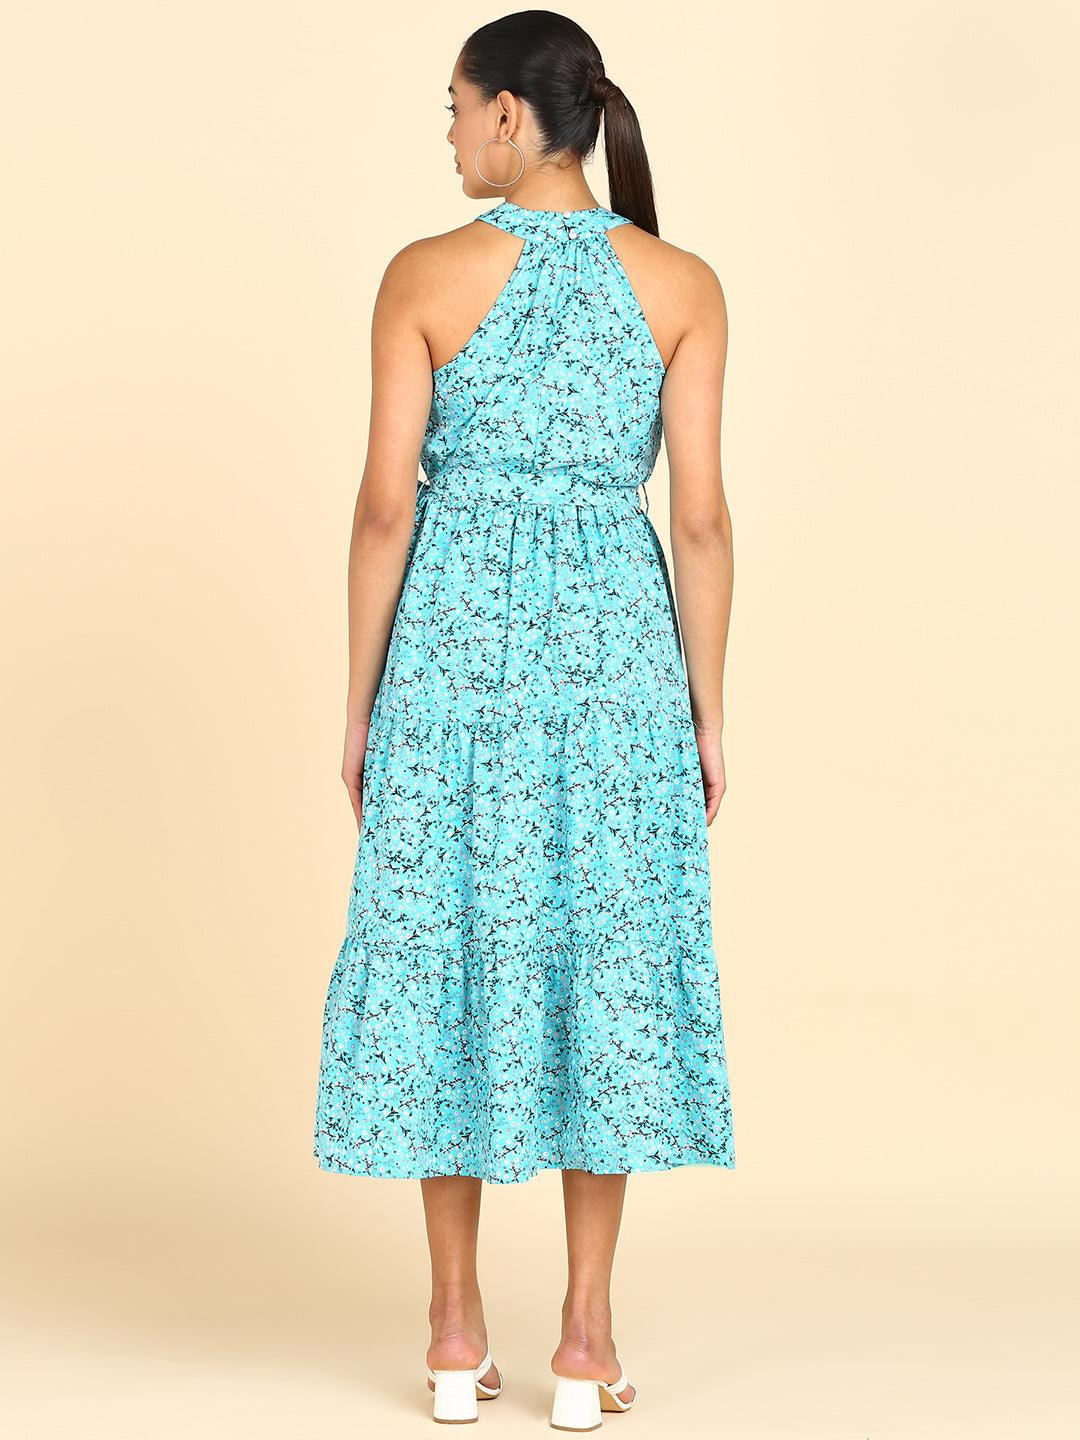 Floral Printed Tiered Sea Blue Dress - Znxclothing